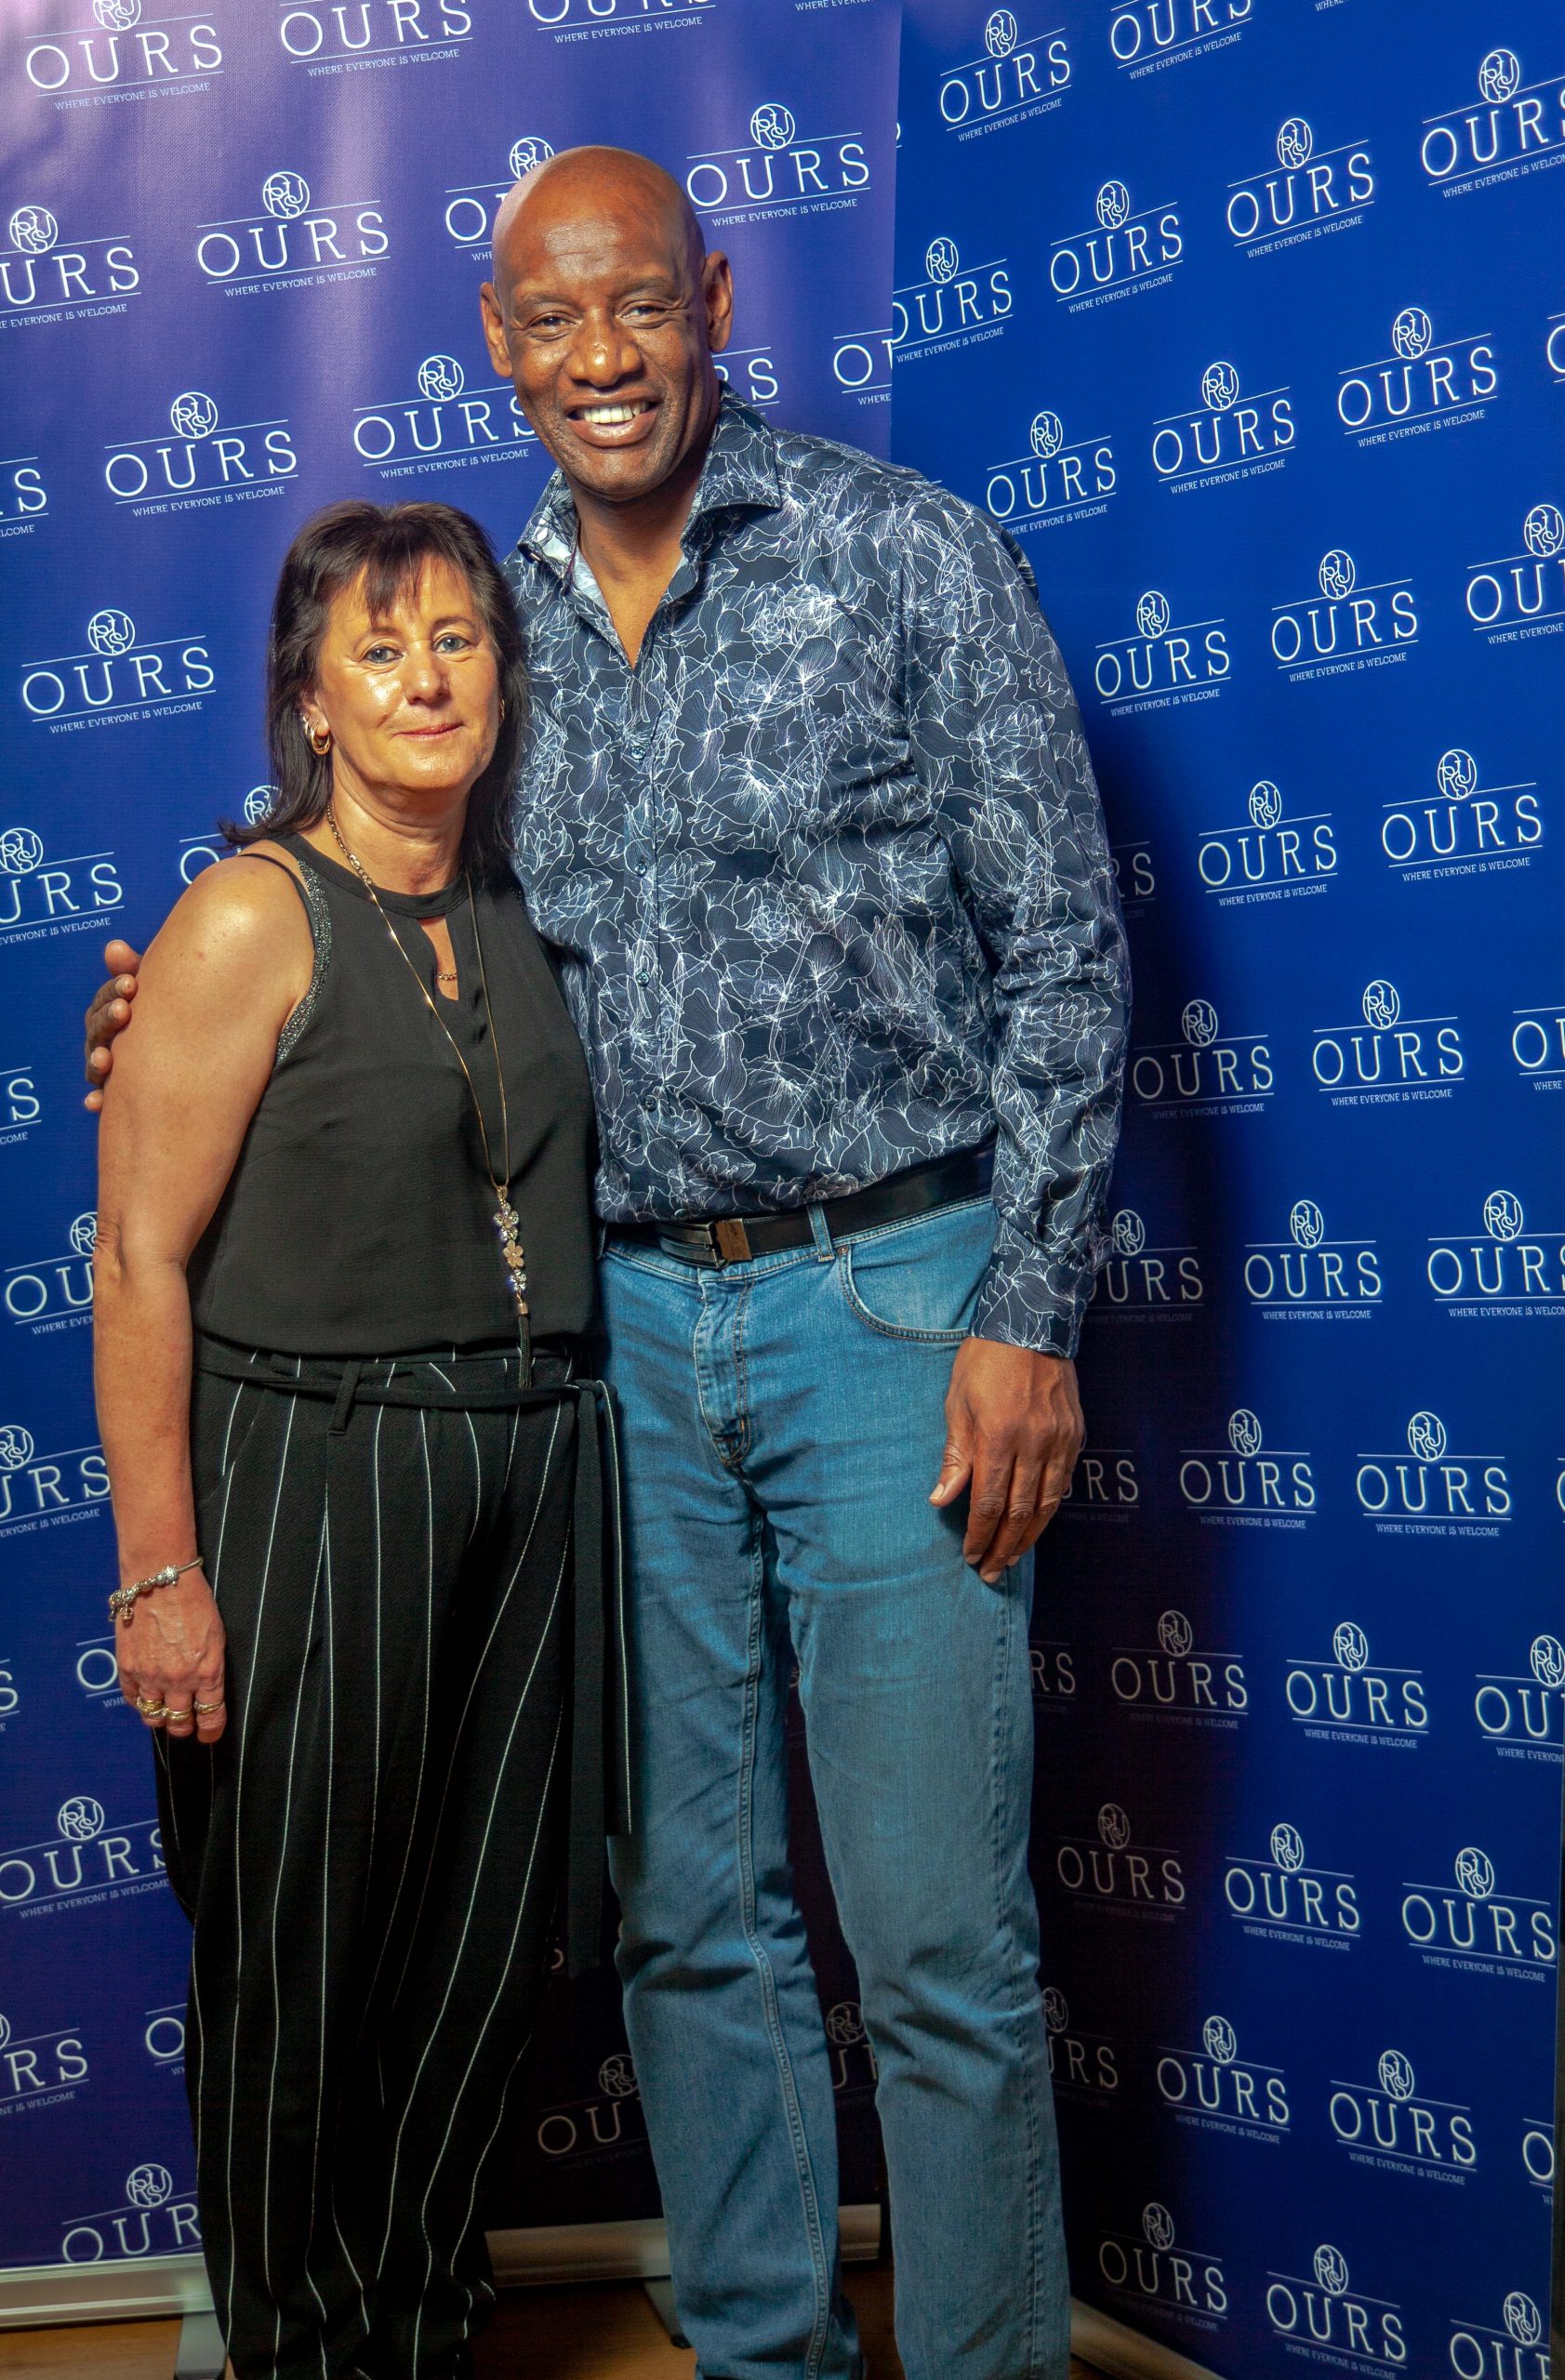 Ours, quiz night with Shaun Wallace-1